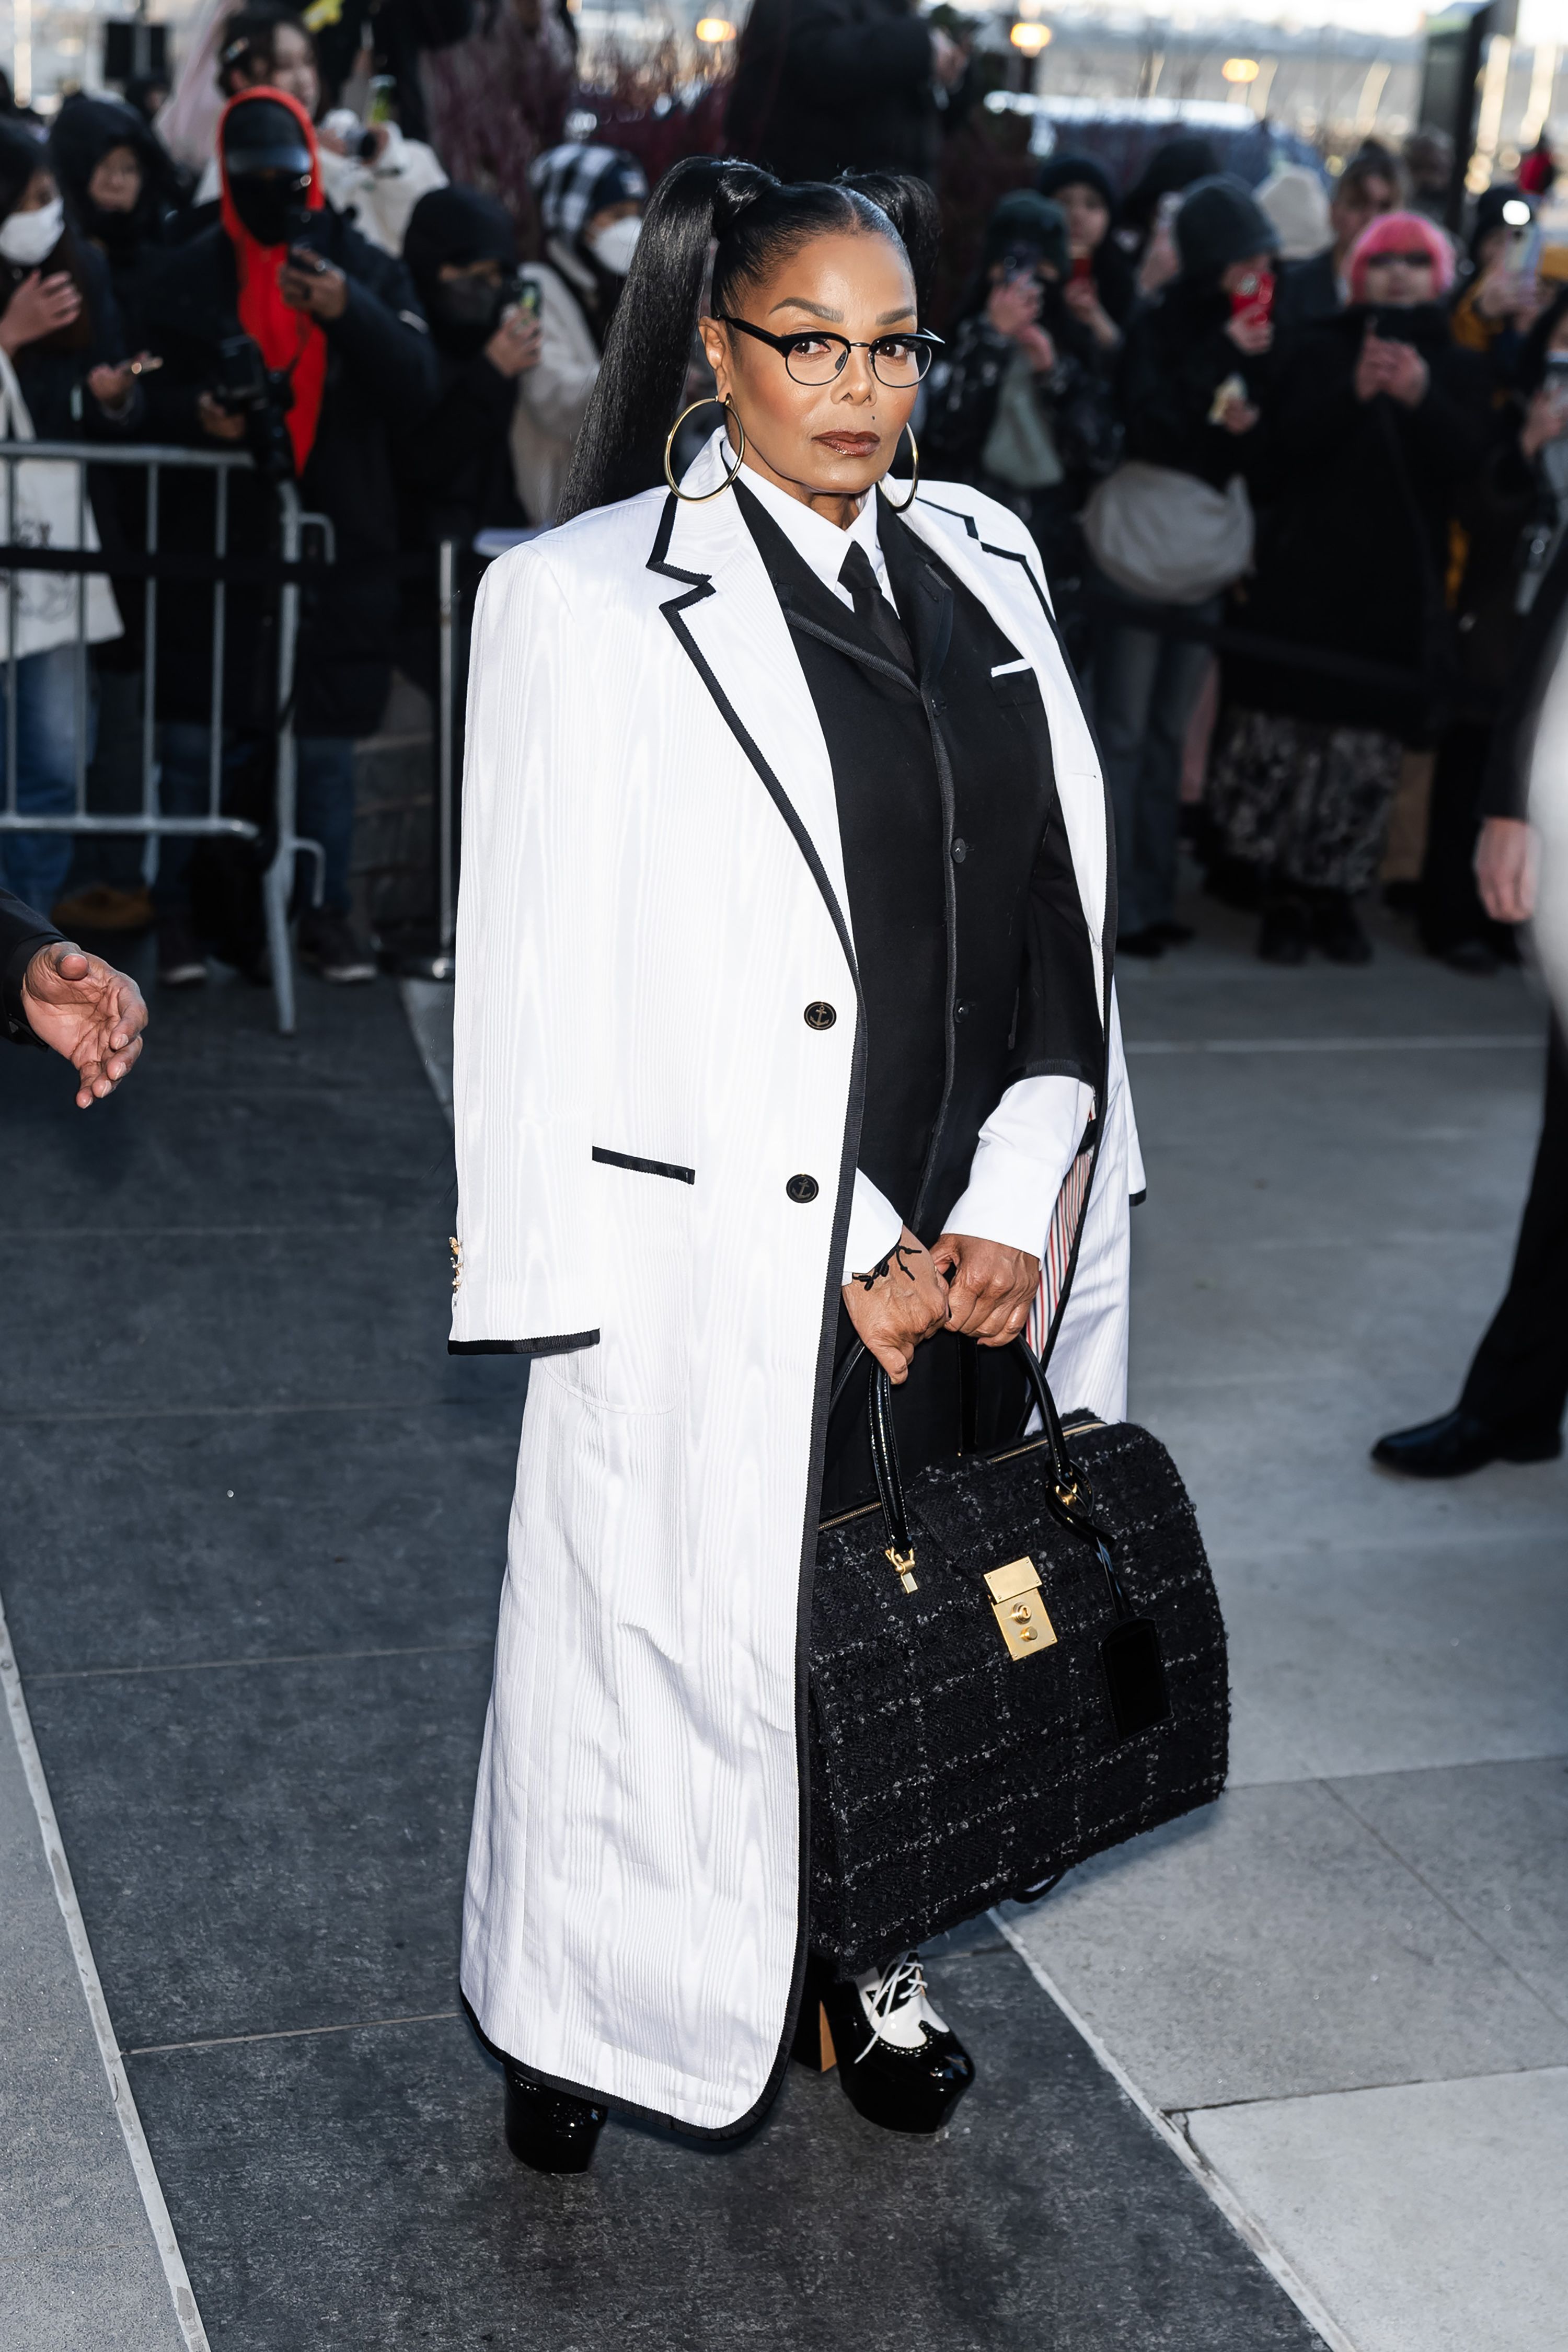 See what celebrities wore to New York Fashion Week, including Beyoncé’s ...